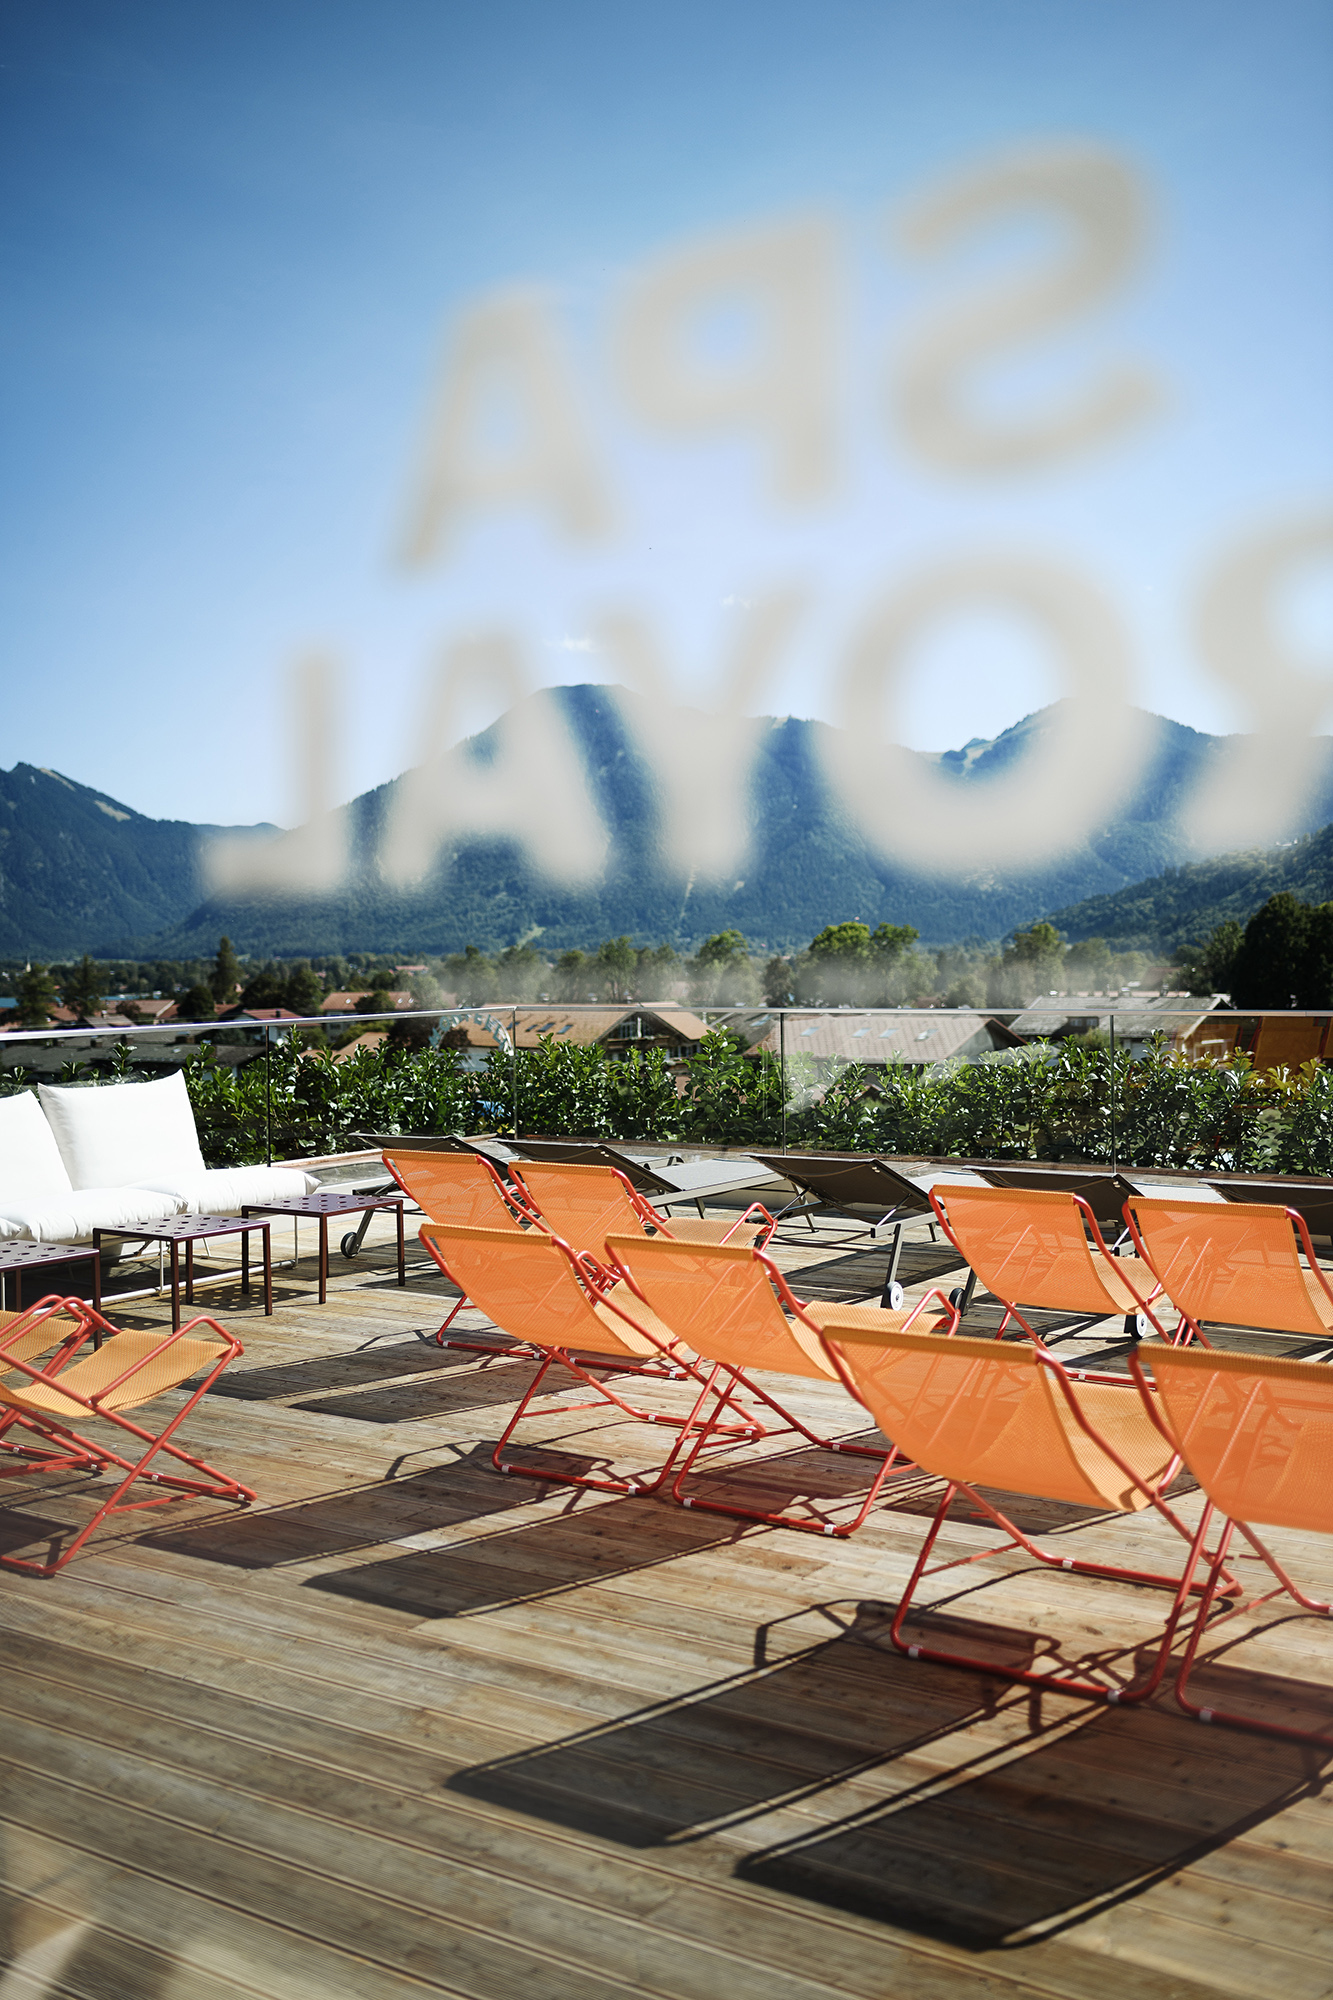 Sun loungers on the terrace of the Spa Royal Hotel Bussi Baby 